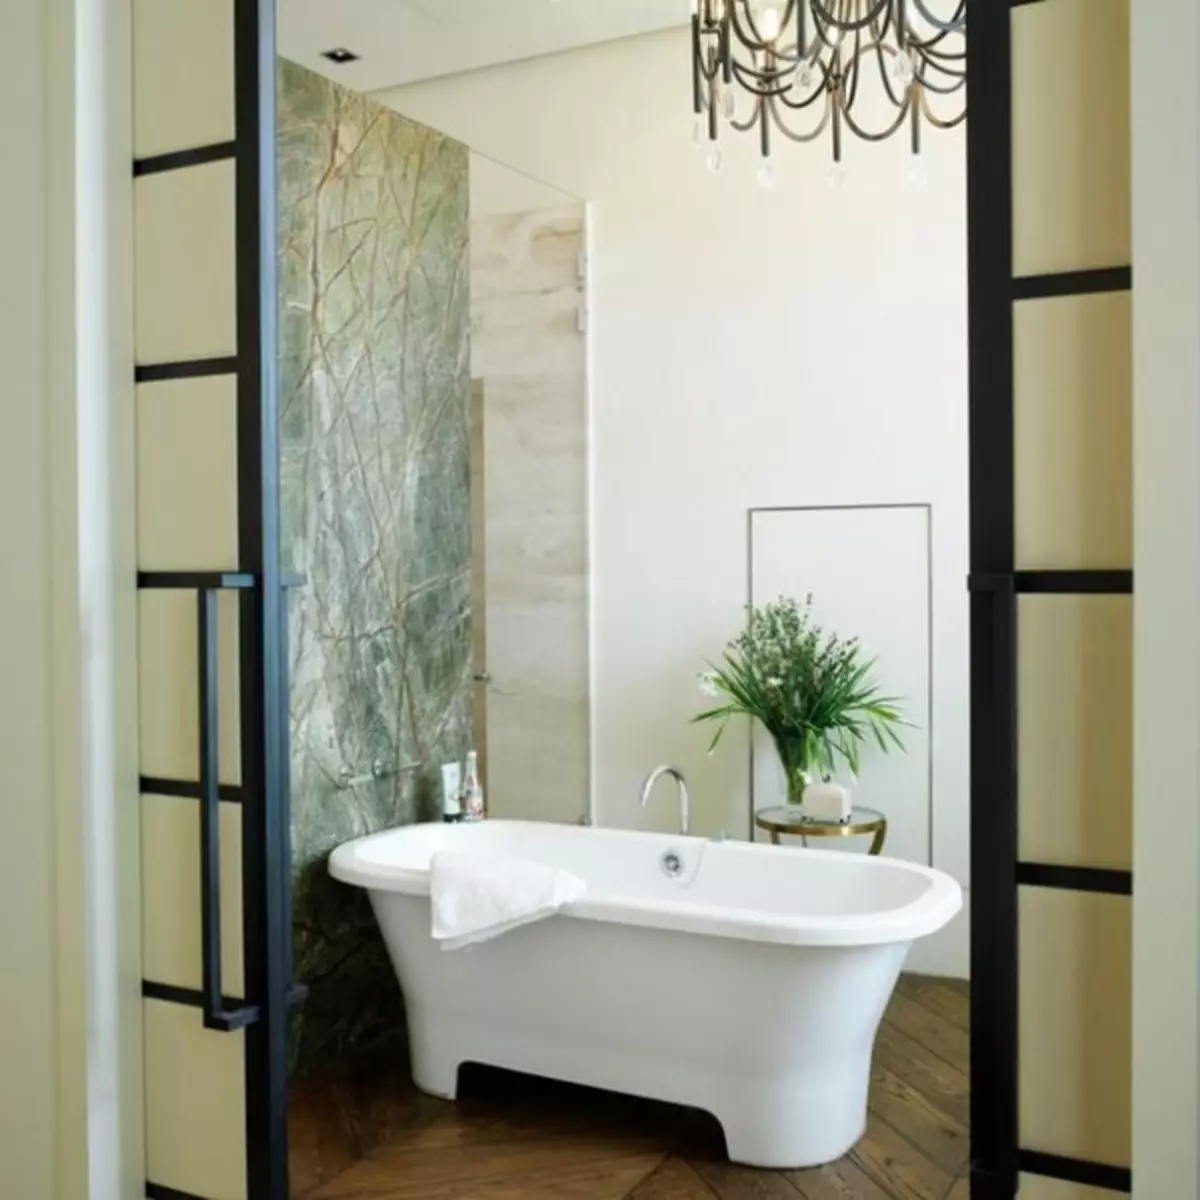 Bathrooms projects - design and design features